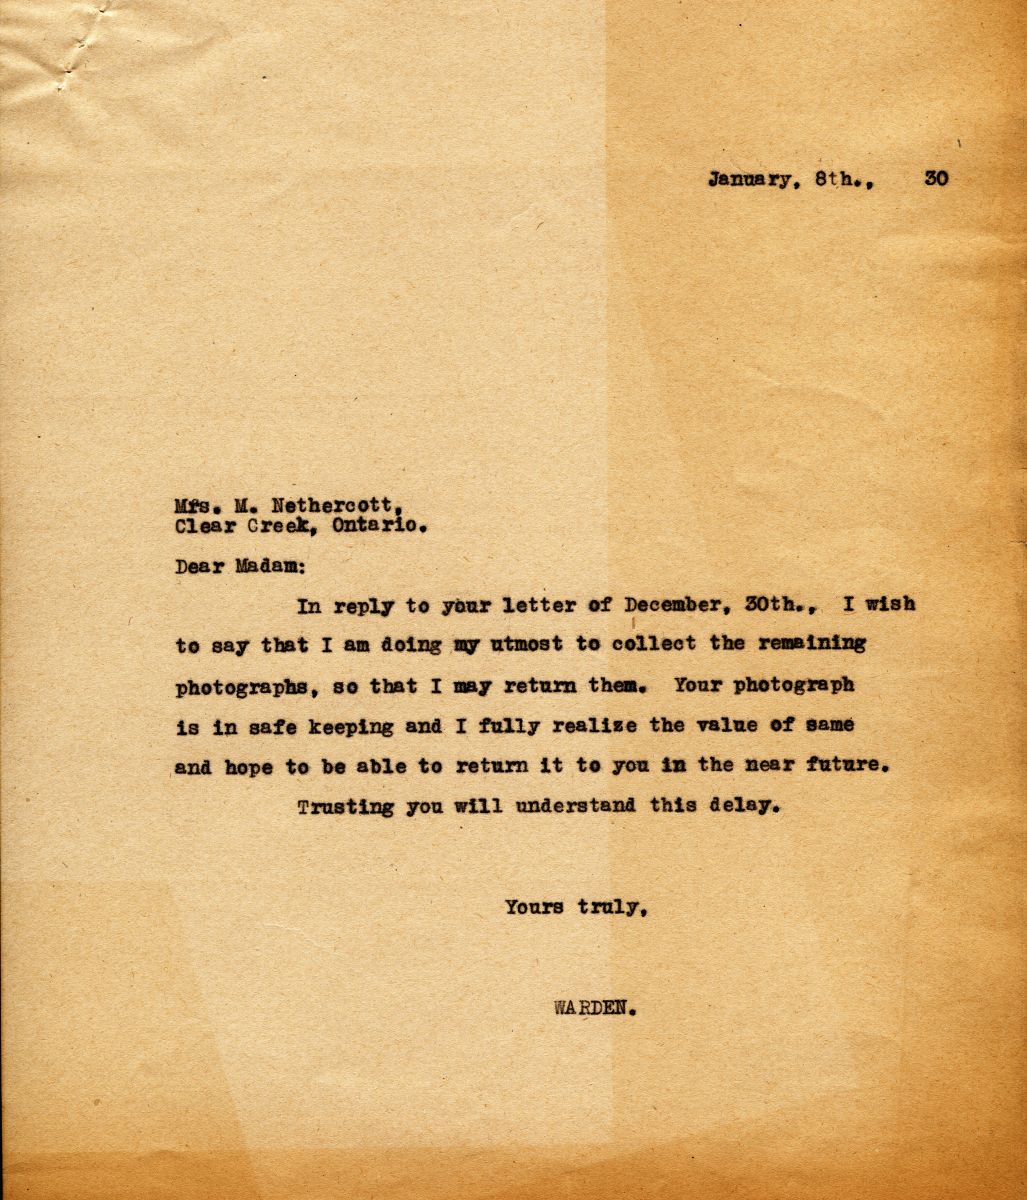 Letter from the Warden to Mrs. M. Nethercott, 8th January 1930